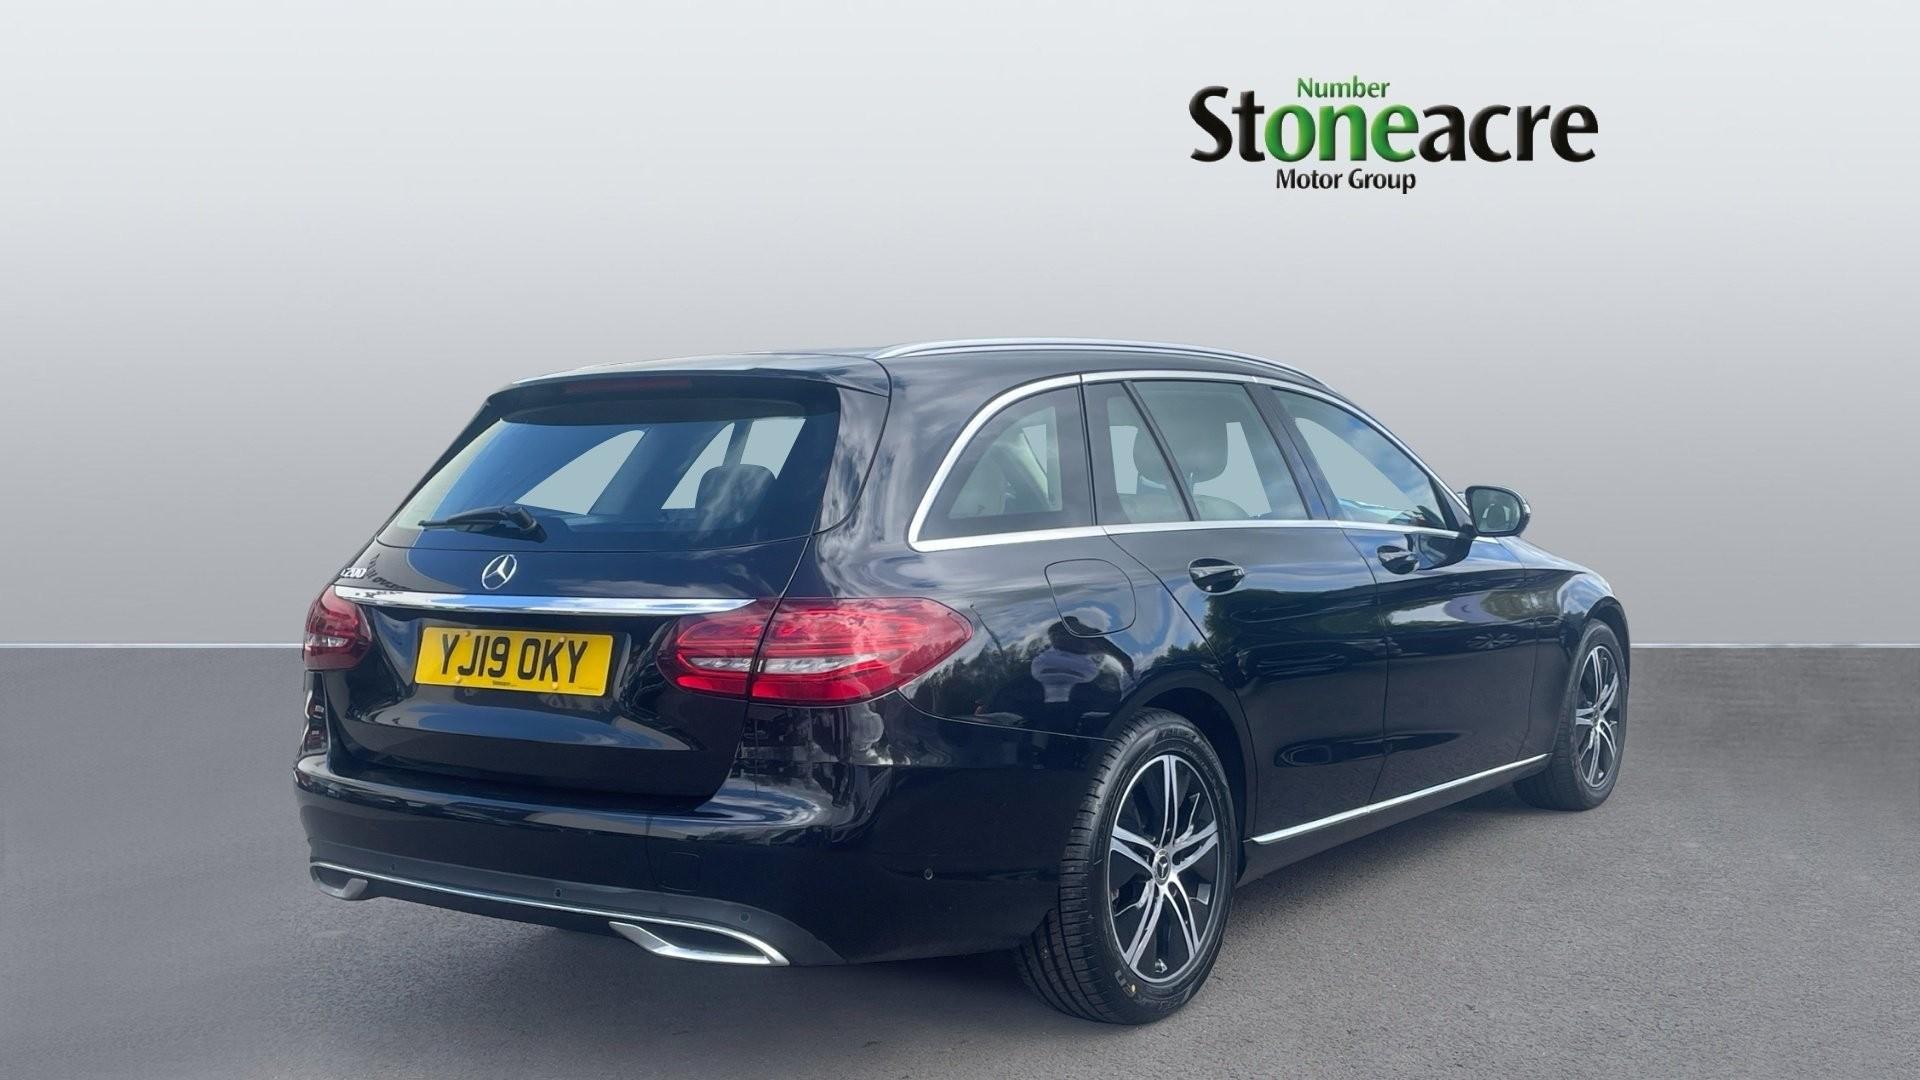 Mercedes-Benz C Class 1.5 C200 MHEV EQ Boost Sport G-Tronic+ Euro 6 (s/s) 5dr (YJ19OKY) image 6